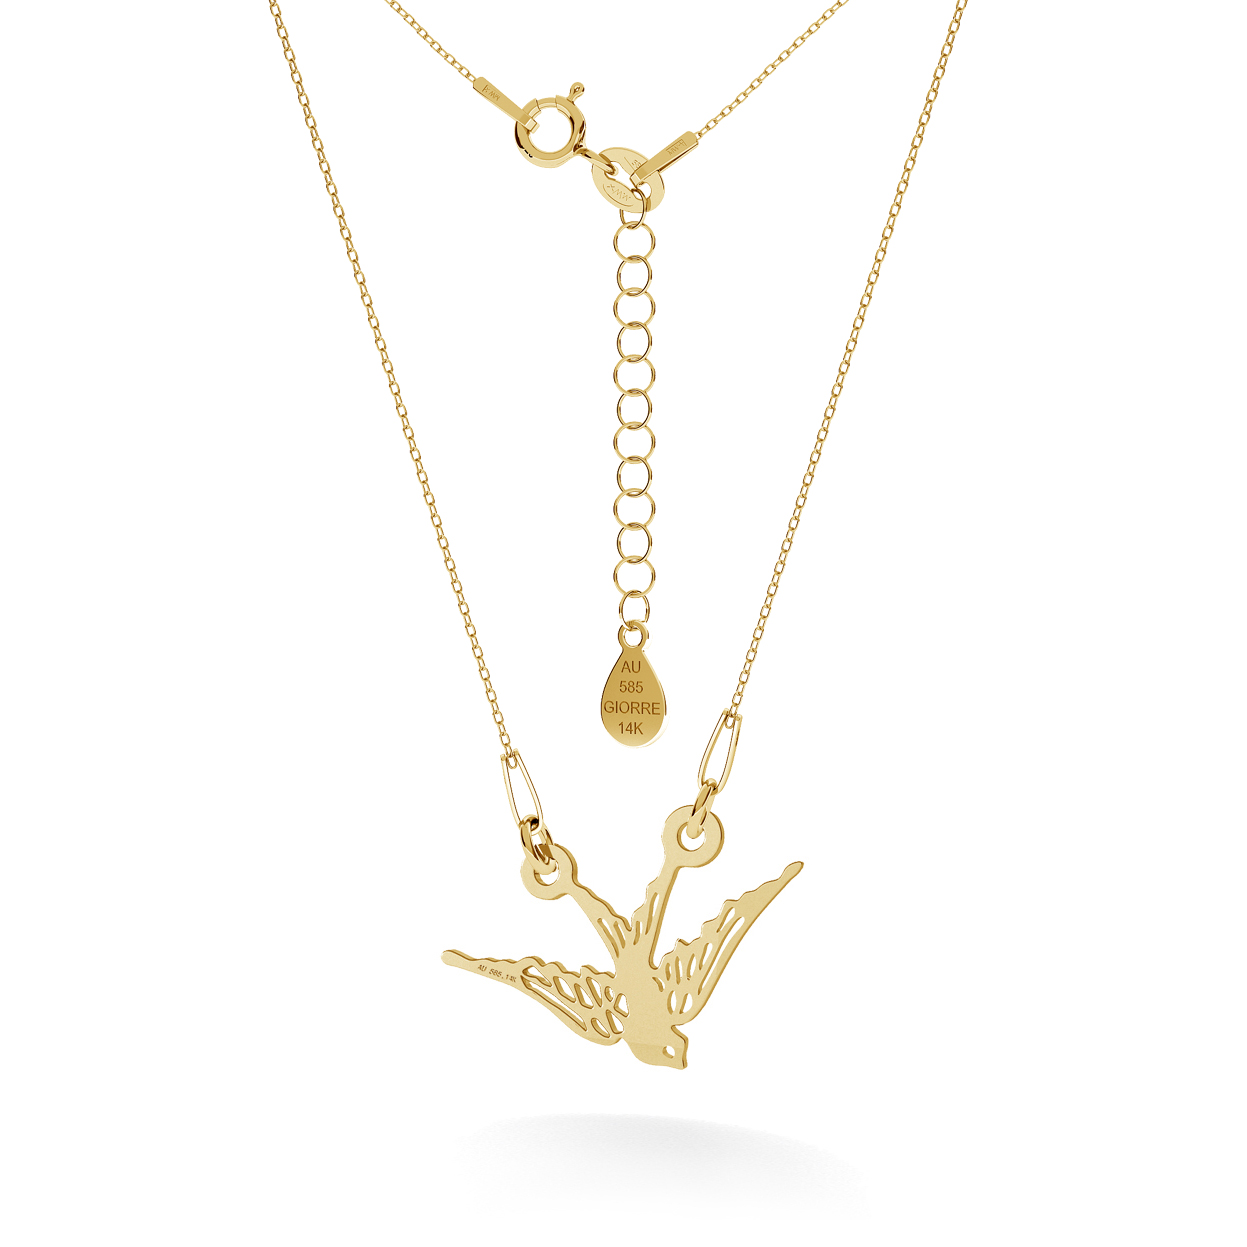 GOLD ANCHOR WITH ENGARVING NECKLACE 14K